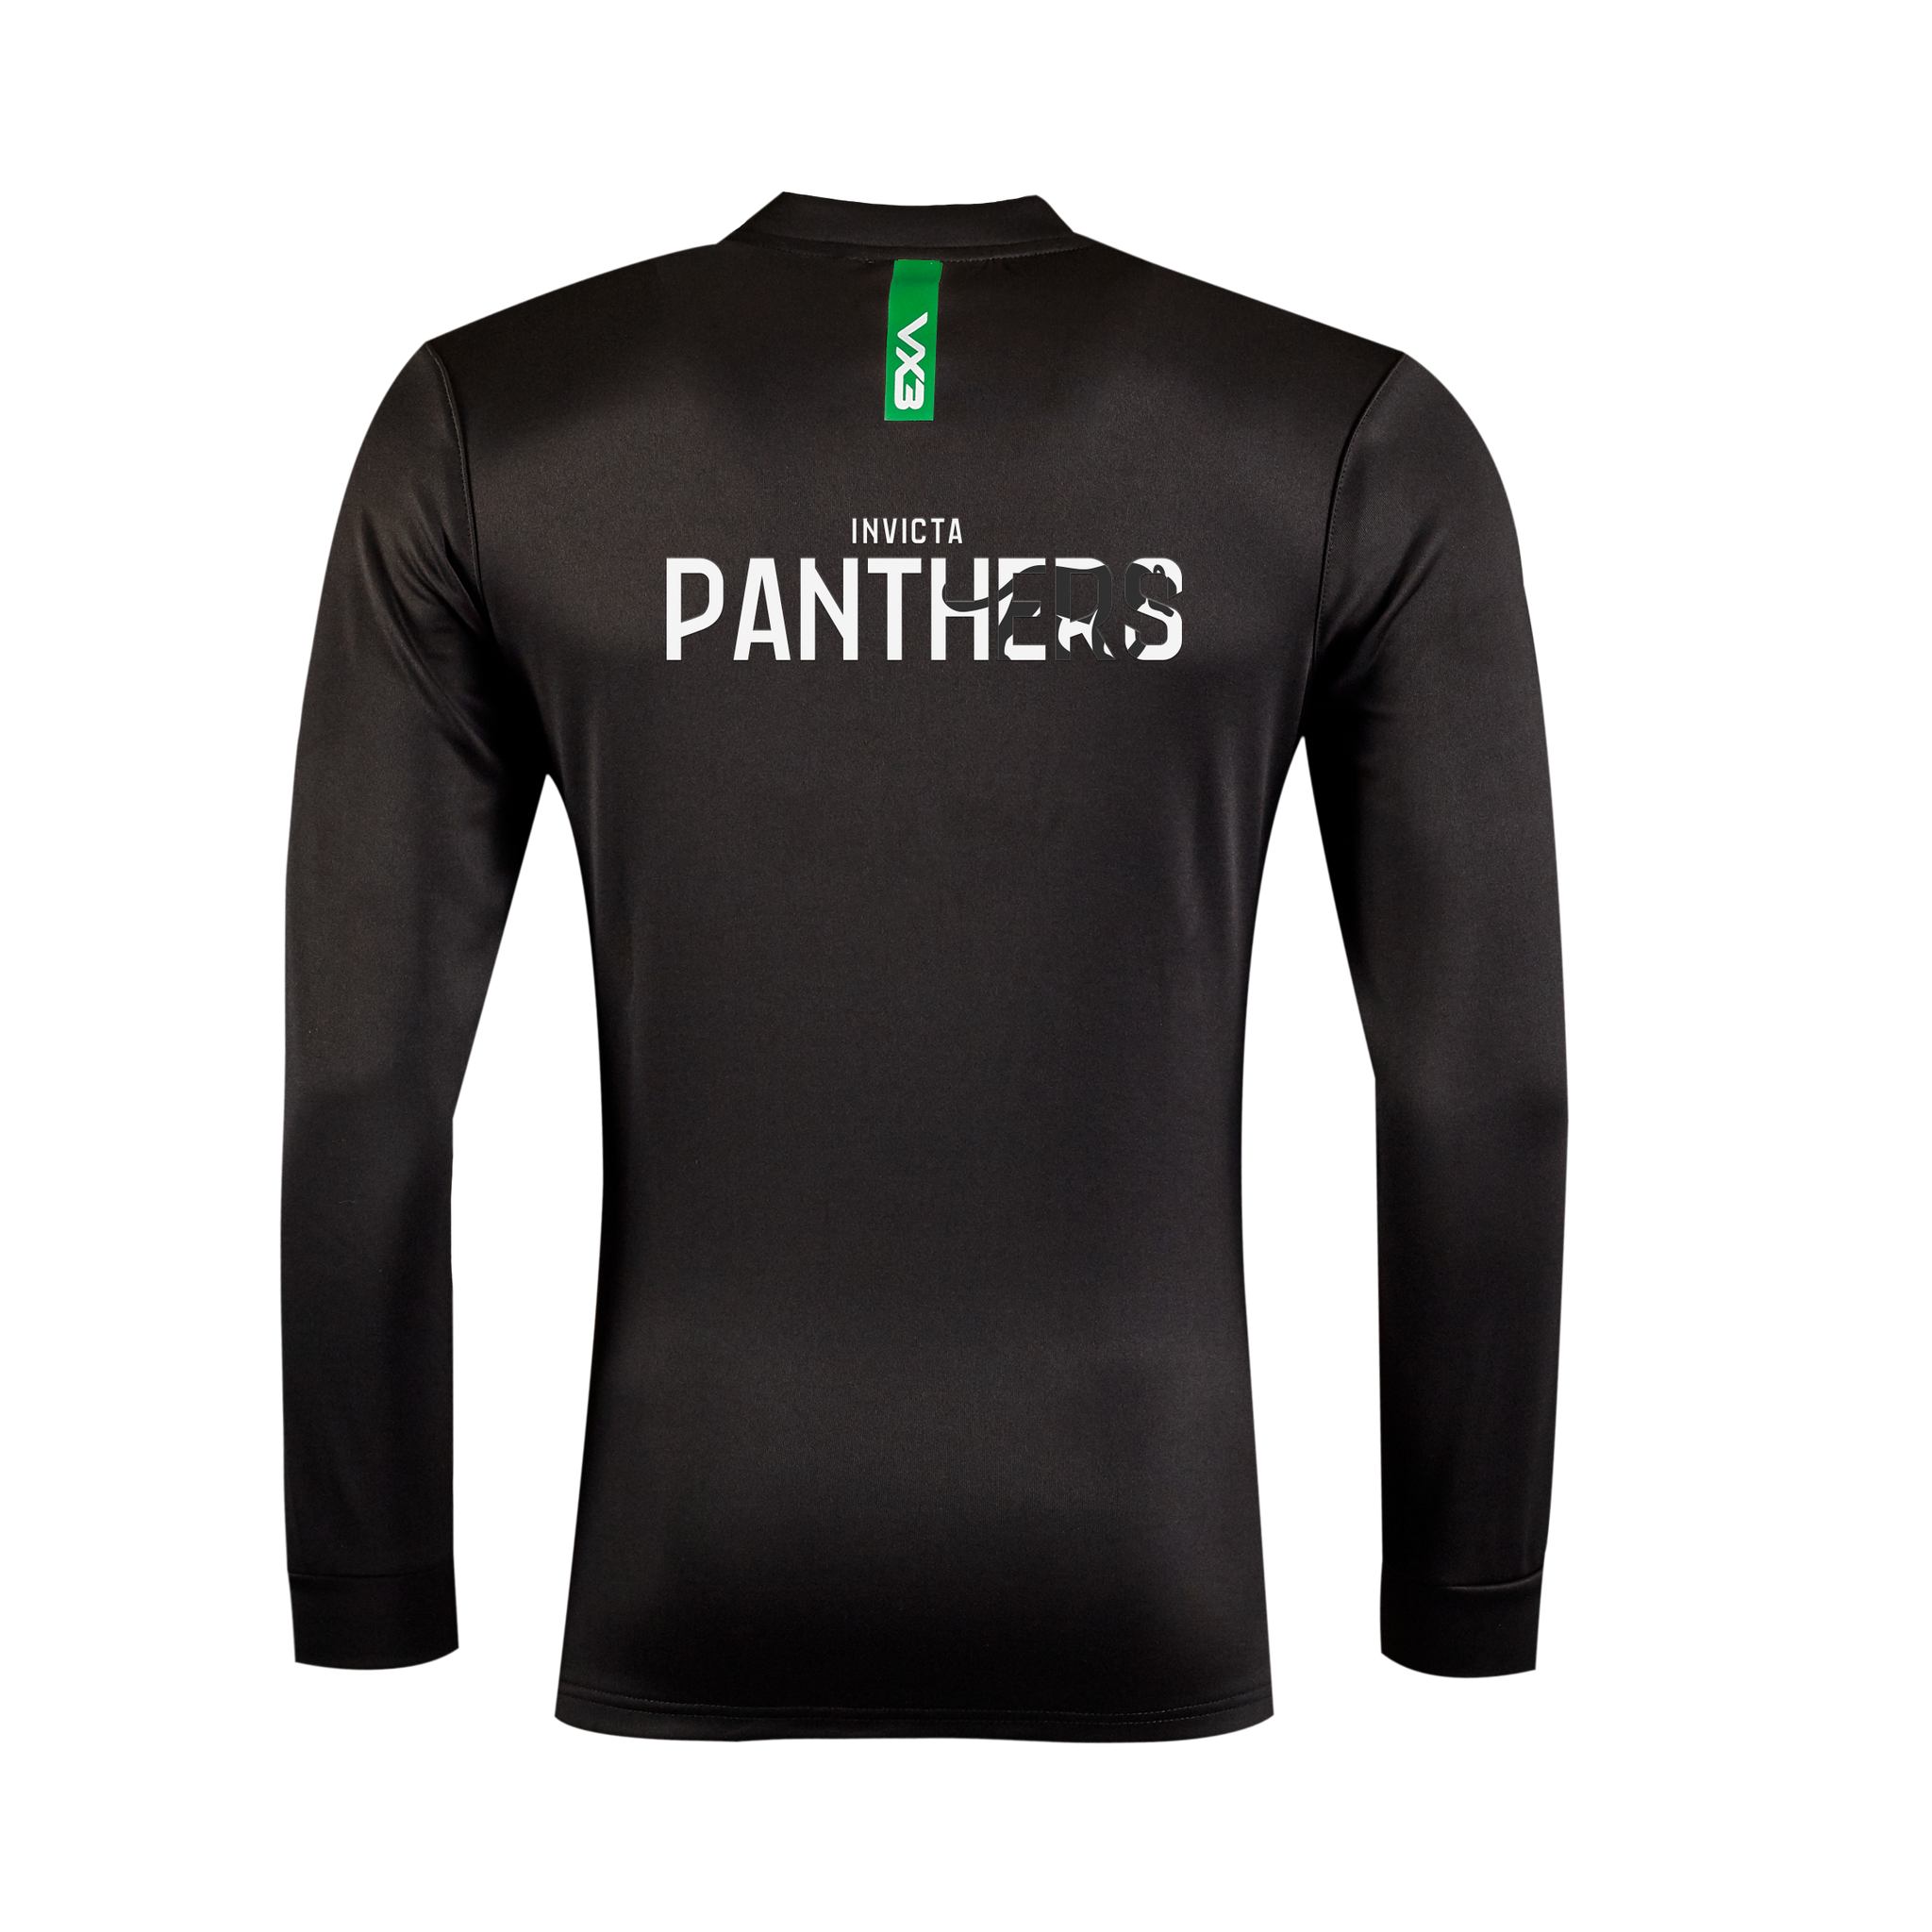 Invicta Panthers RLFC Fortis Youth Presentation Jacket